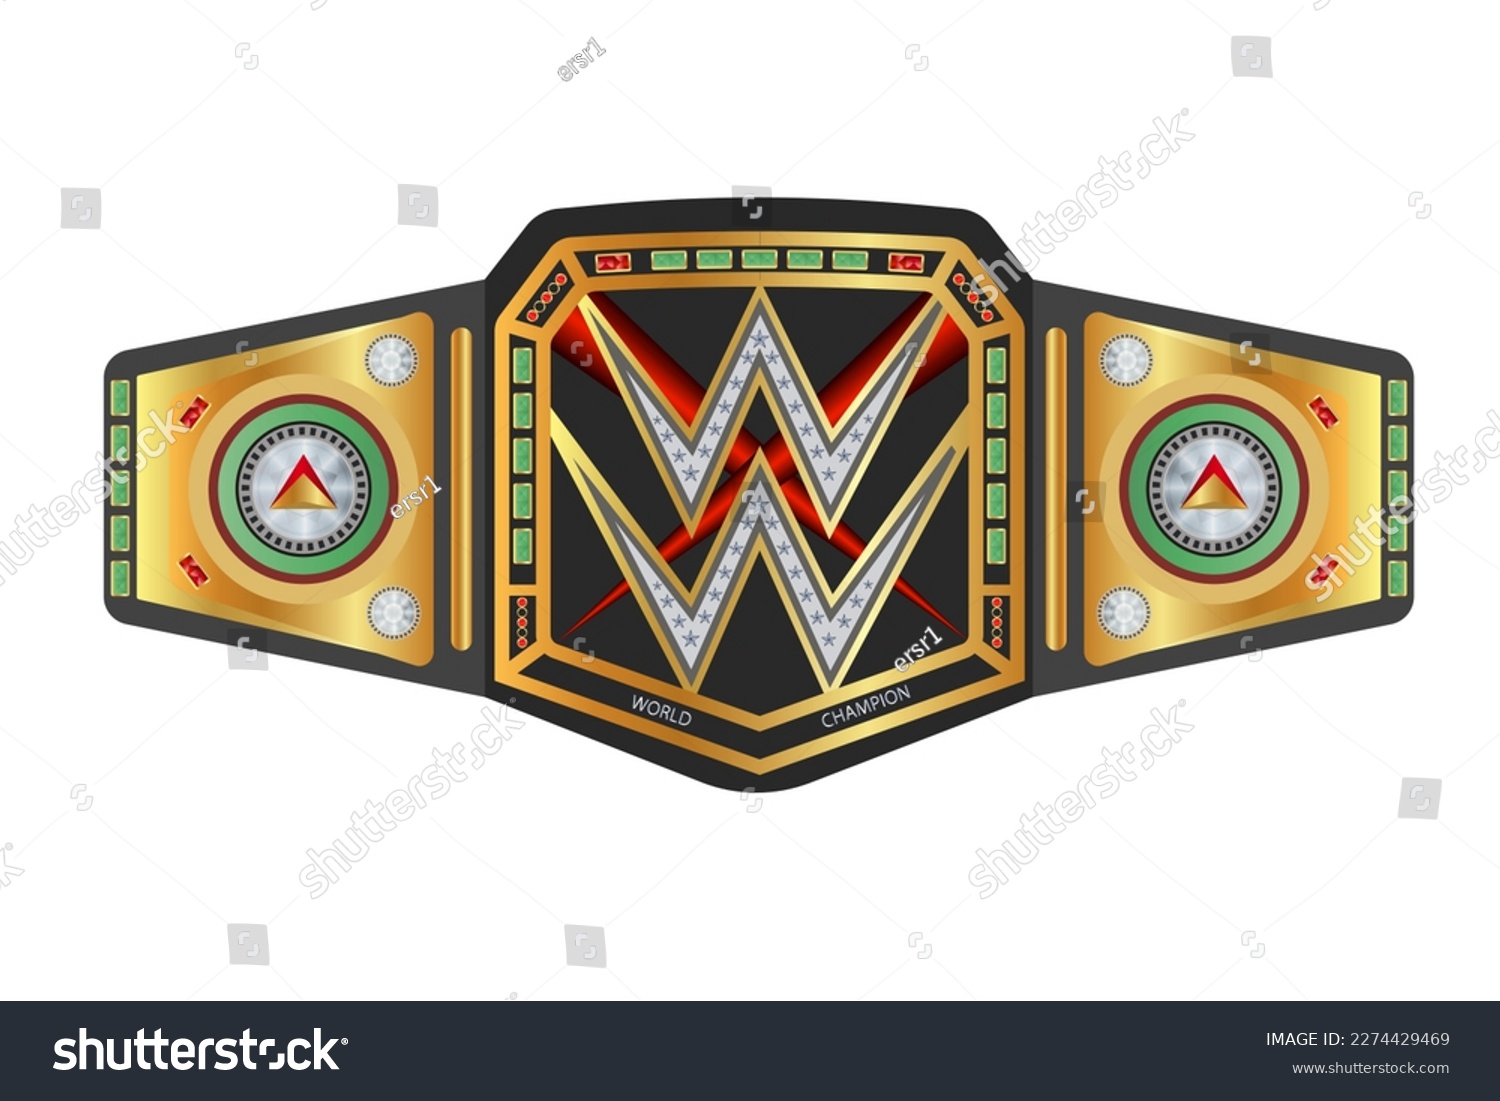 SVG of boxing championship belt with two letters 